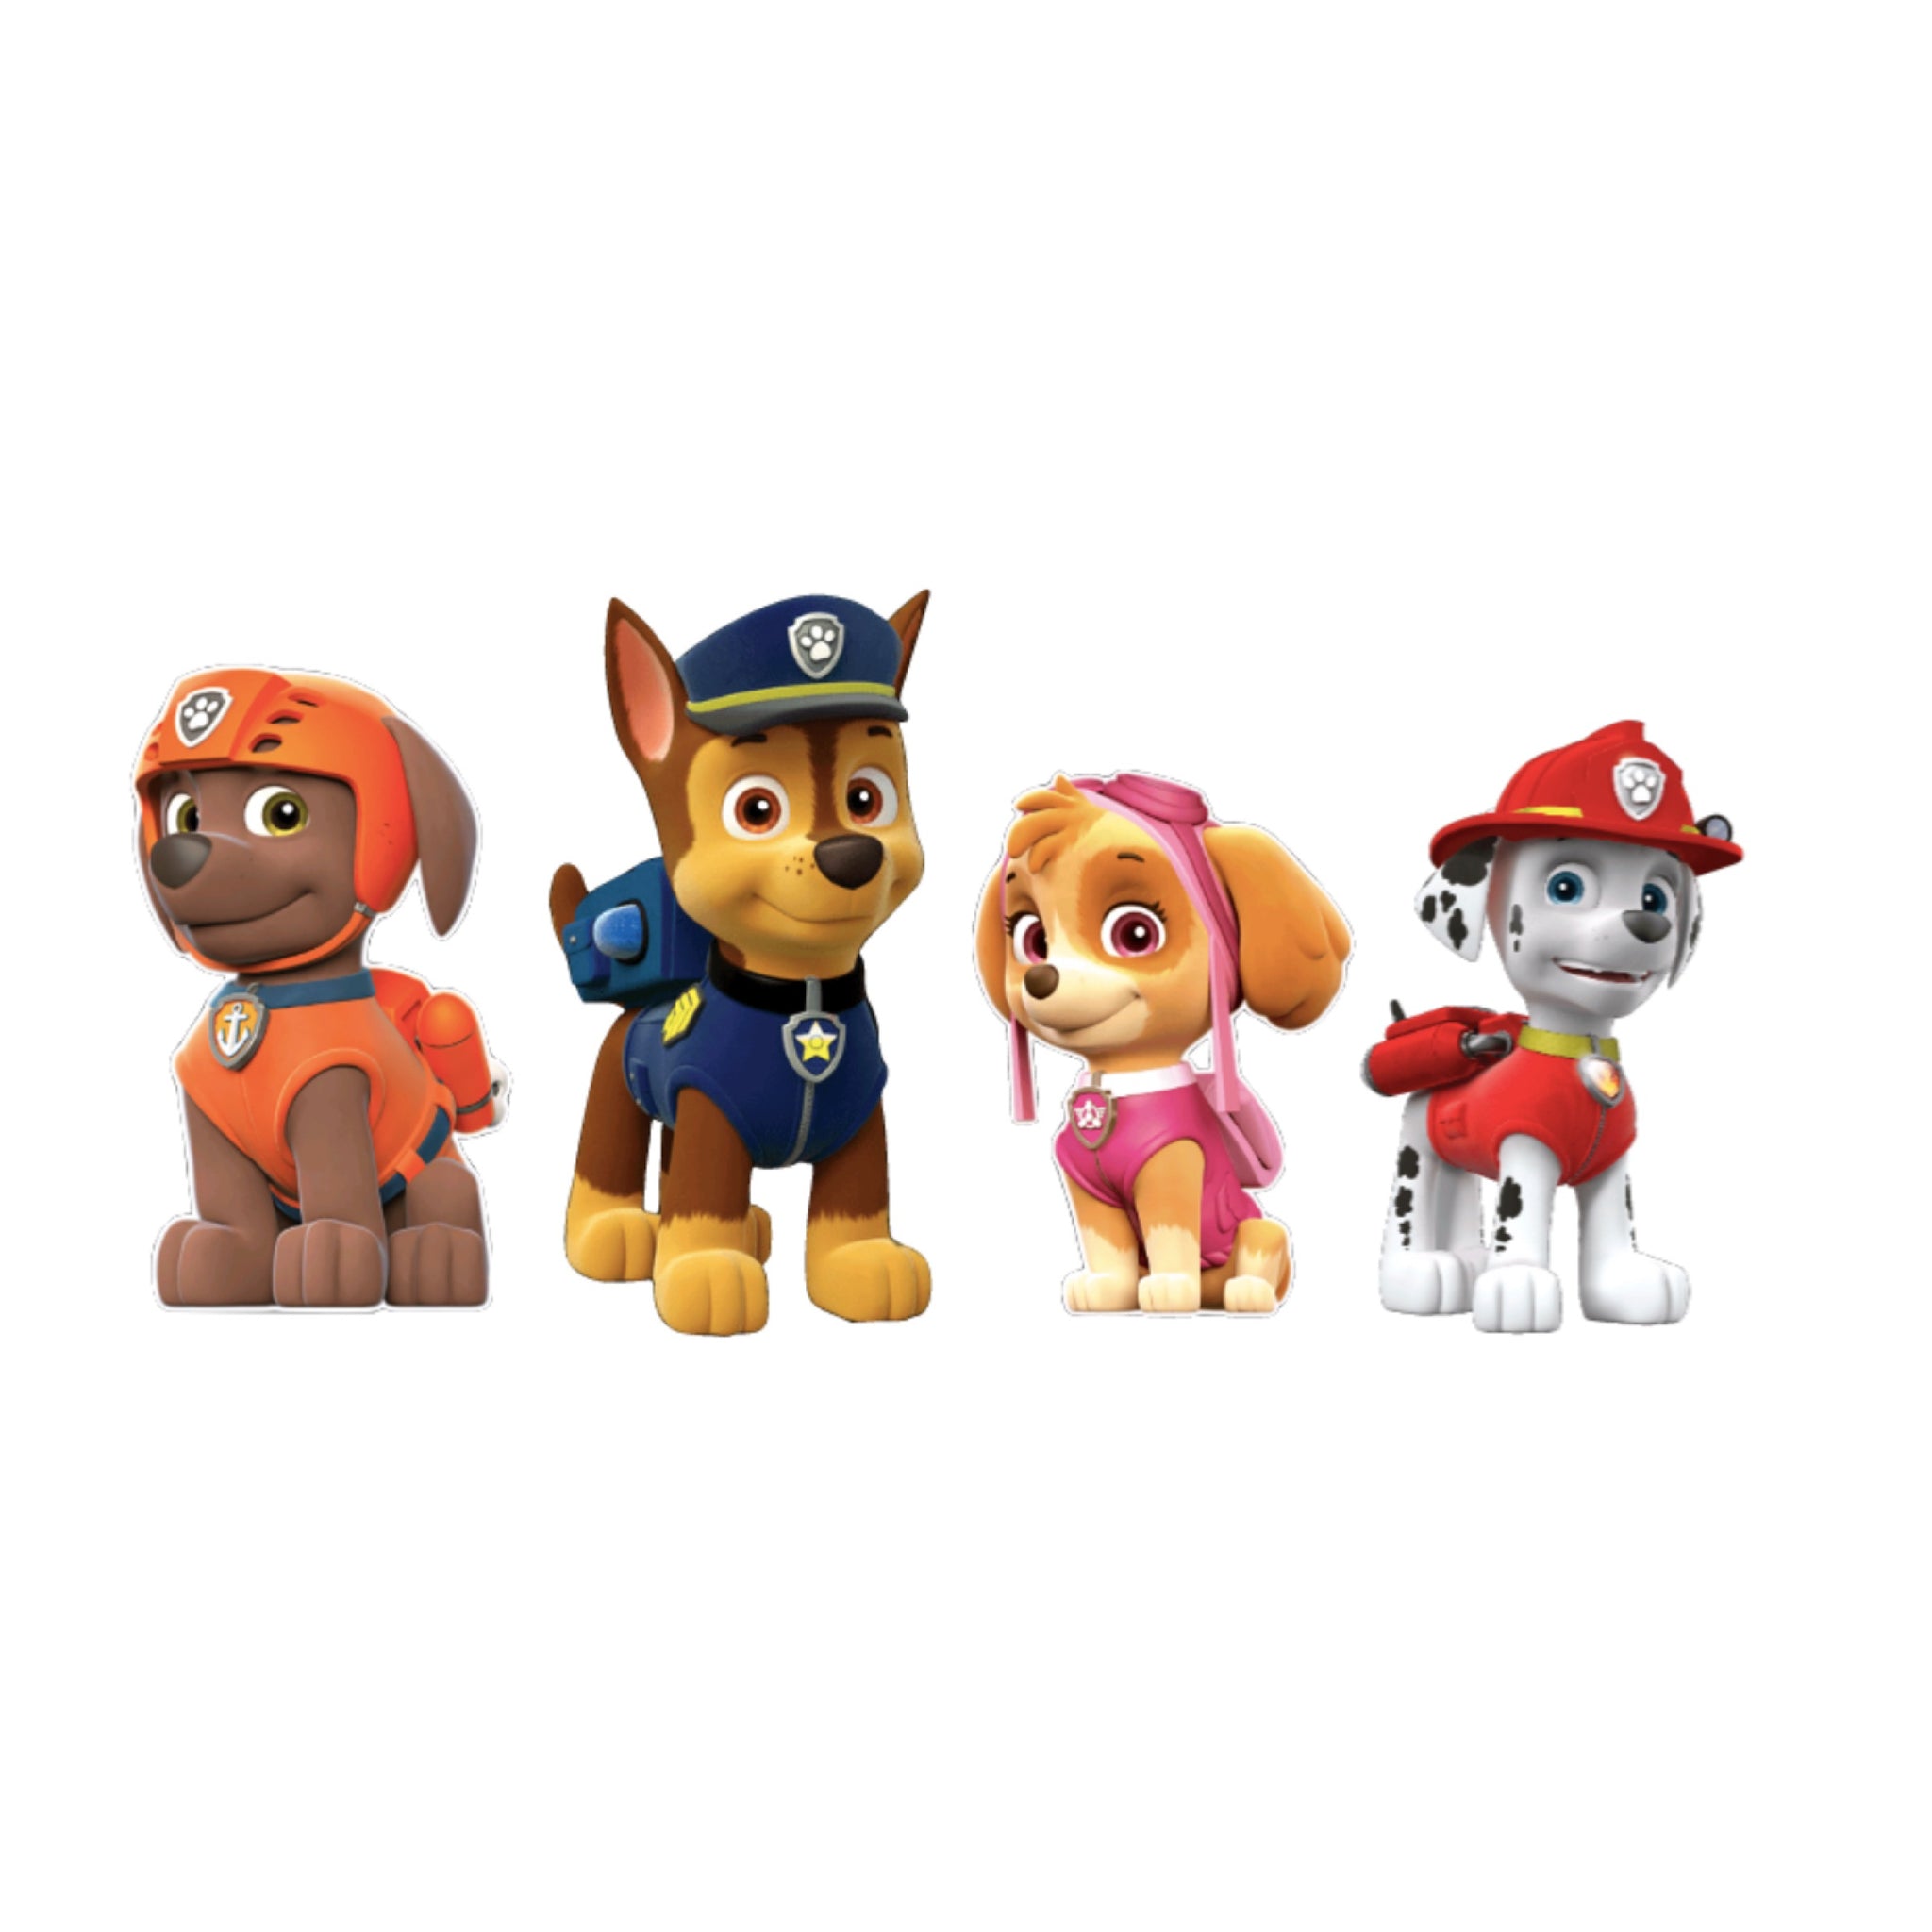 Paw Patrol Characters PRE CUT 2.5" Edible Icing Cake Topper Decorations Birthday